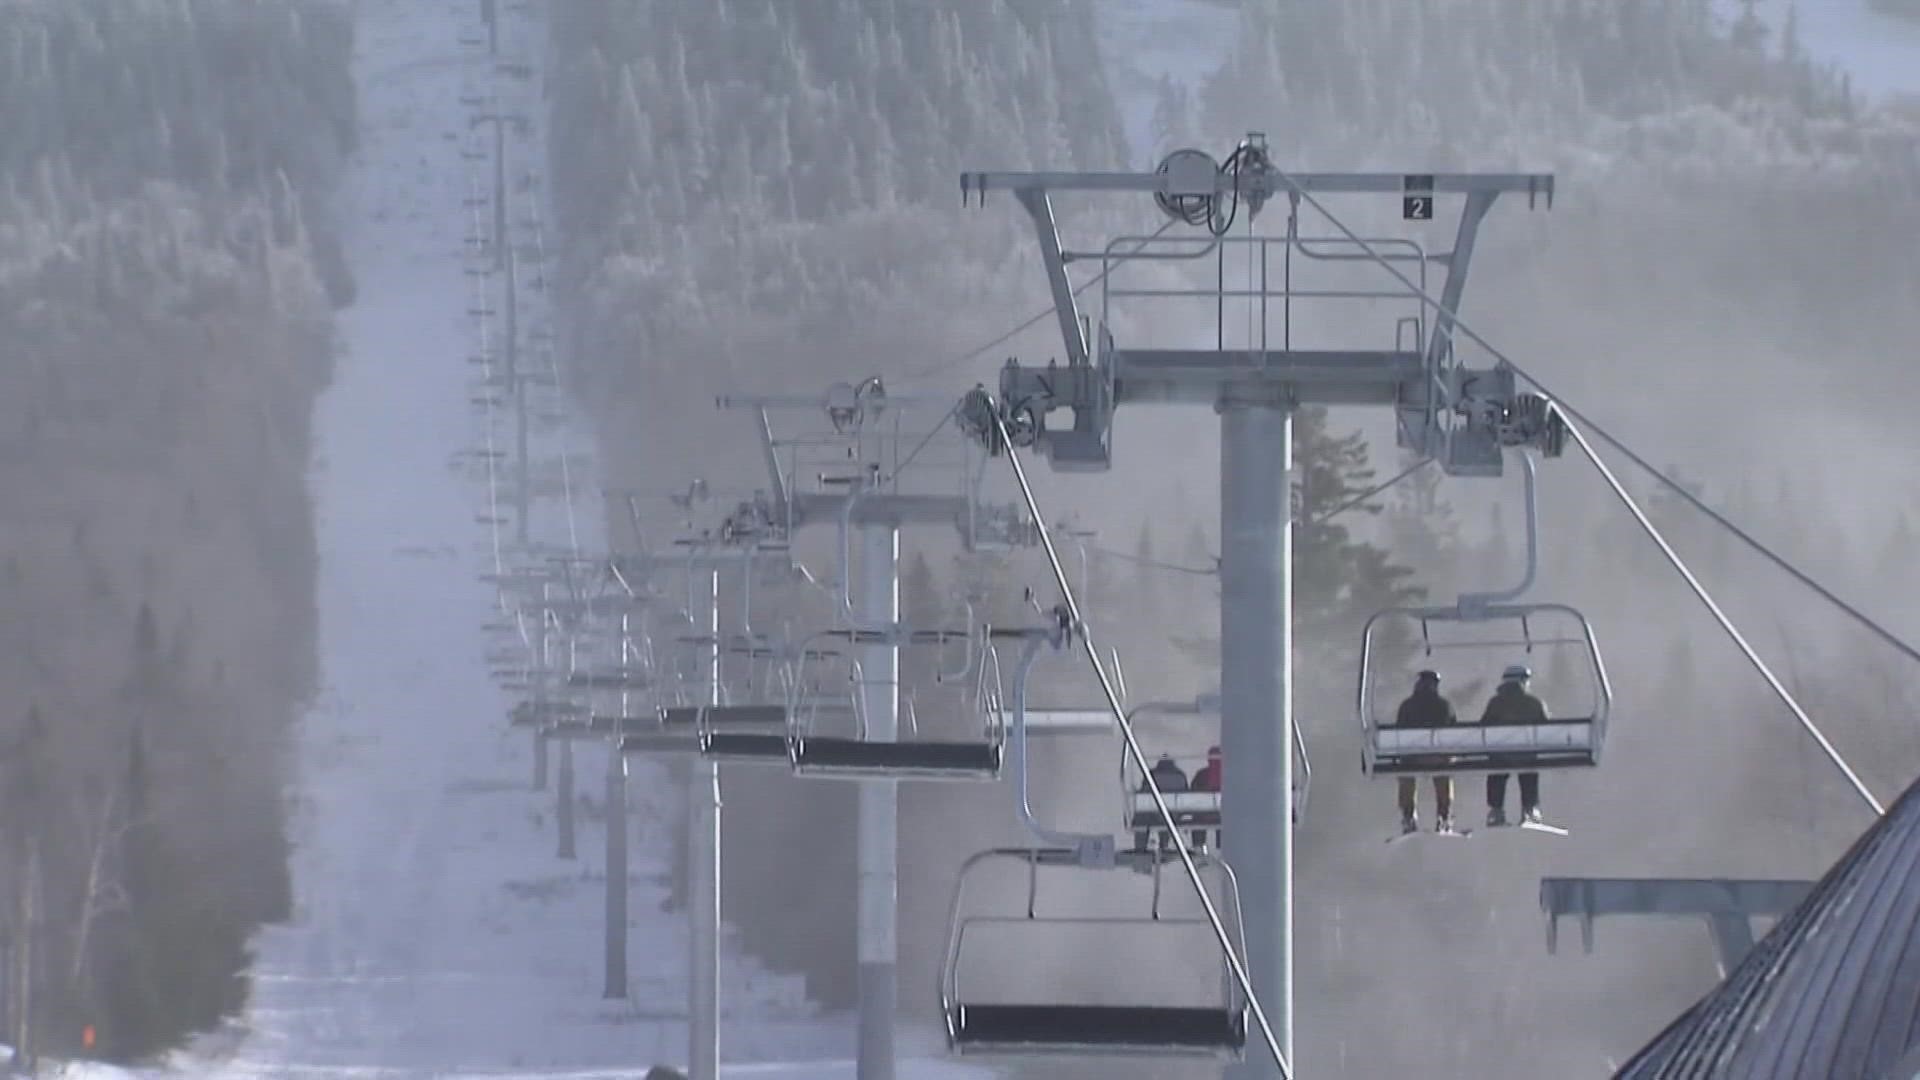 Ski shop owners and local resorts are gearing up for another expected busy winter season.